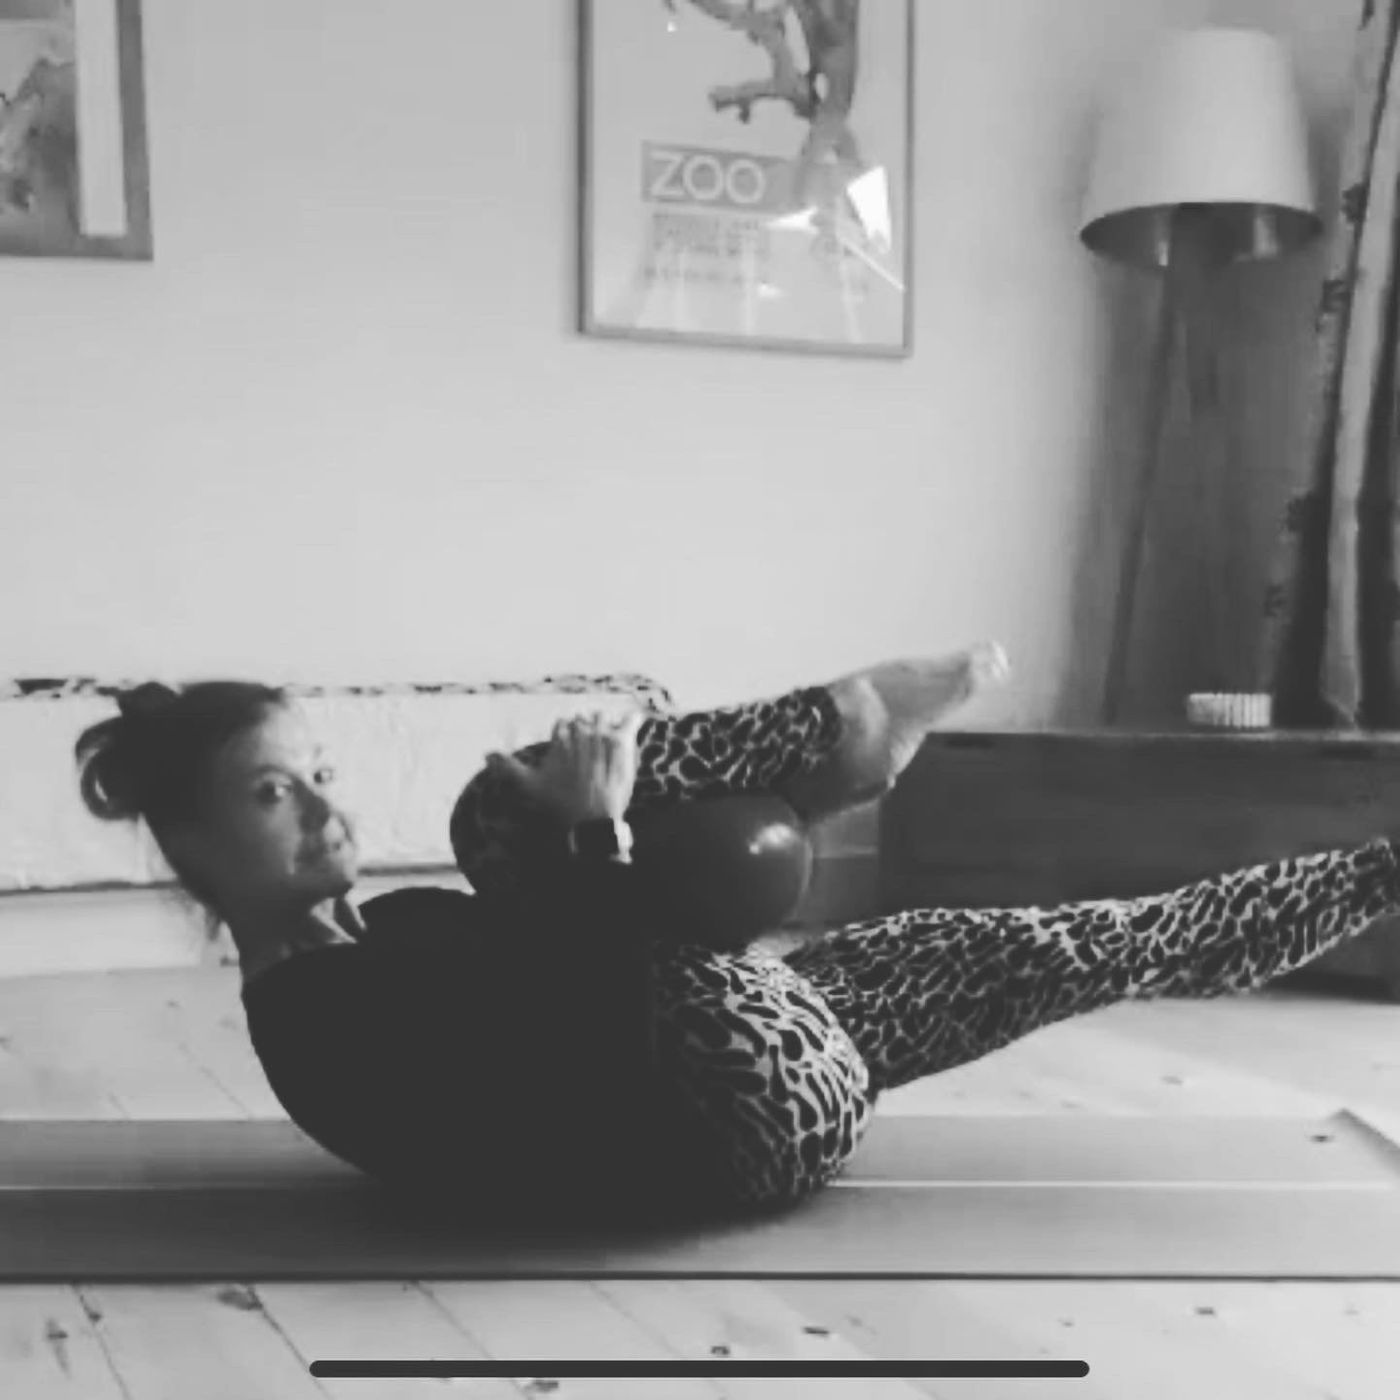 The power of the ball! 
Integrating a pilates ball into your practice gives you immediate core feedback, highlights imbalances and adds massive resistance or provides back-loving assistance!
https://bua.fit/class/ekOu0X3YdQak